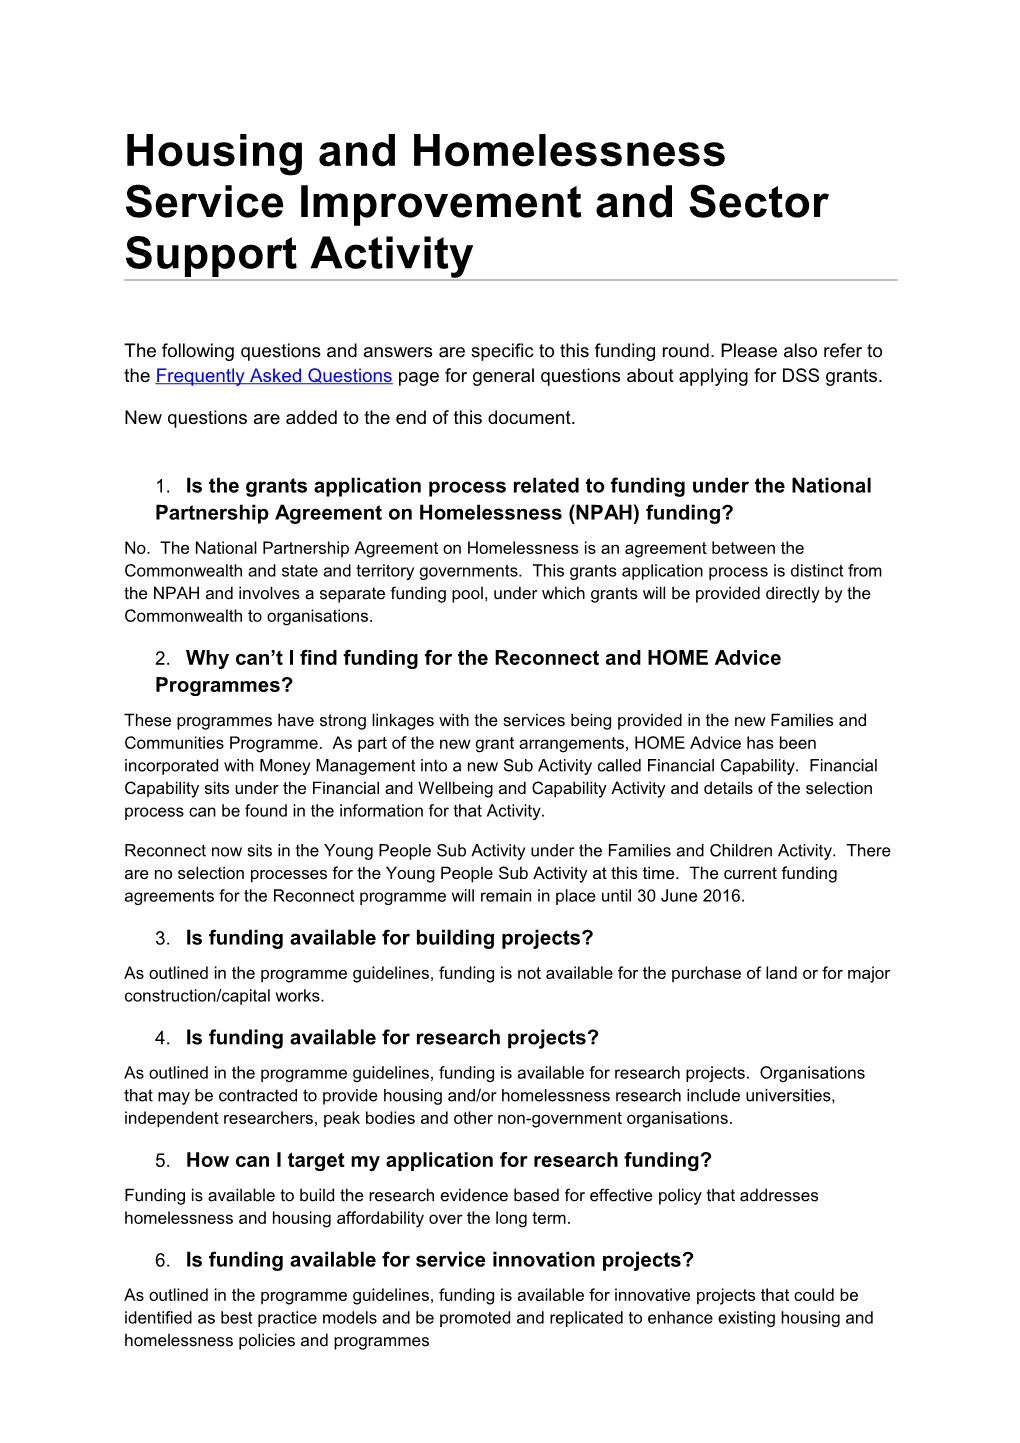 Housing and Homelessness Service Improvement and Sector Support Activity